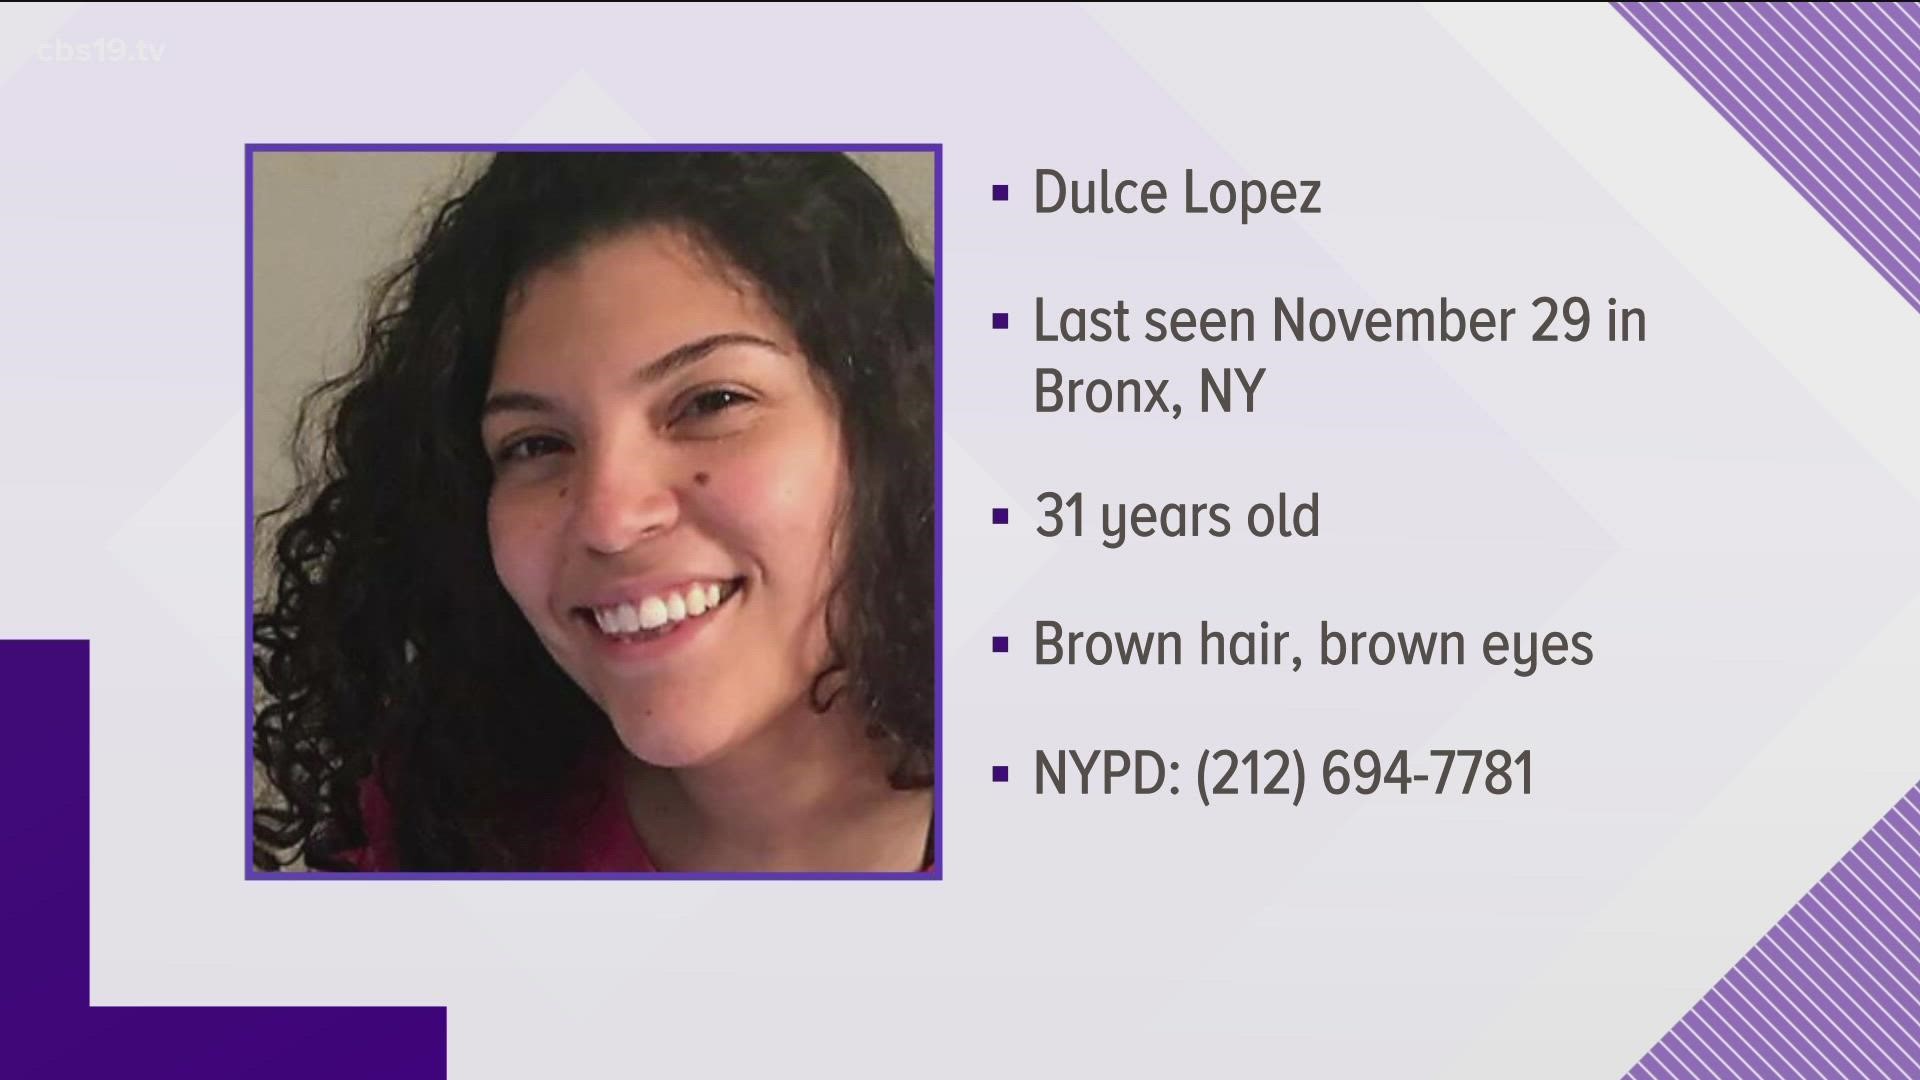 Dulce Lopez was reported missing in November